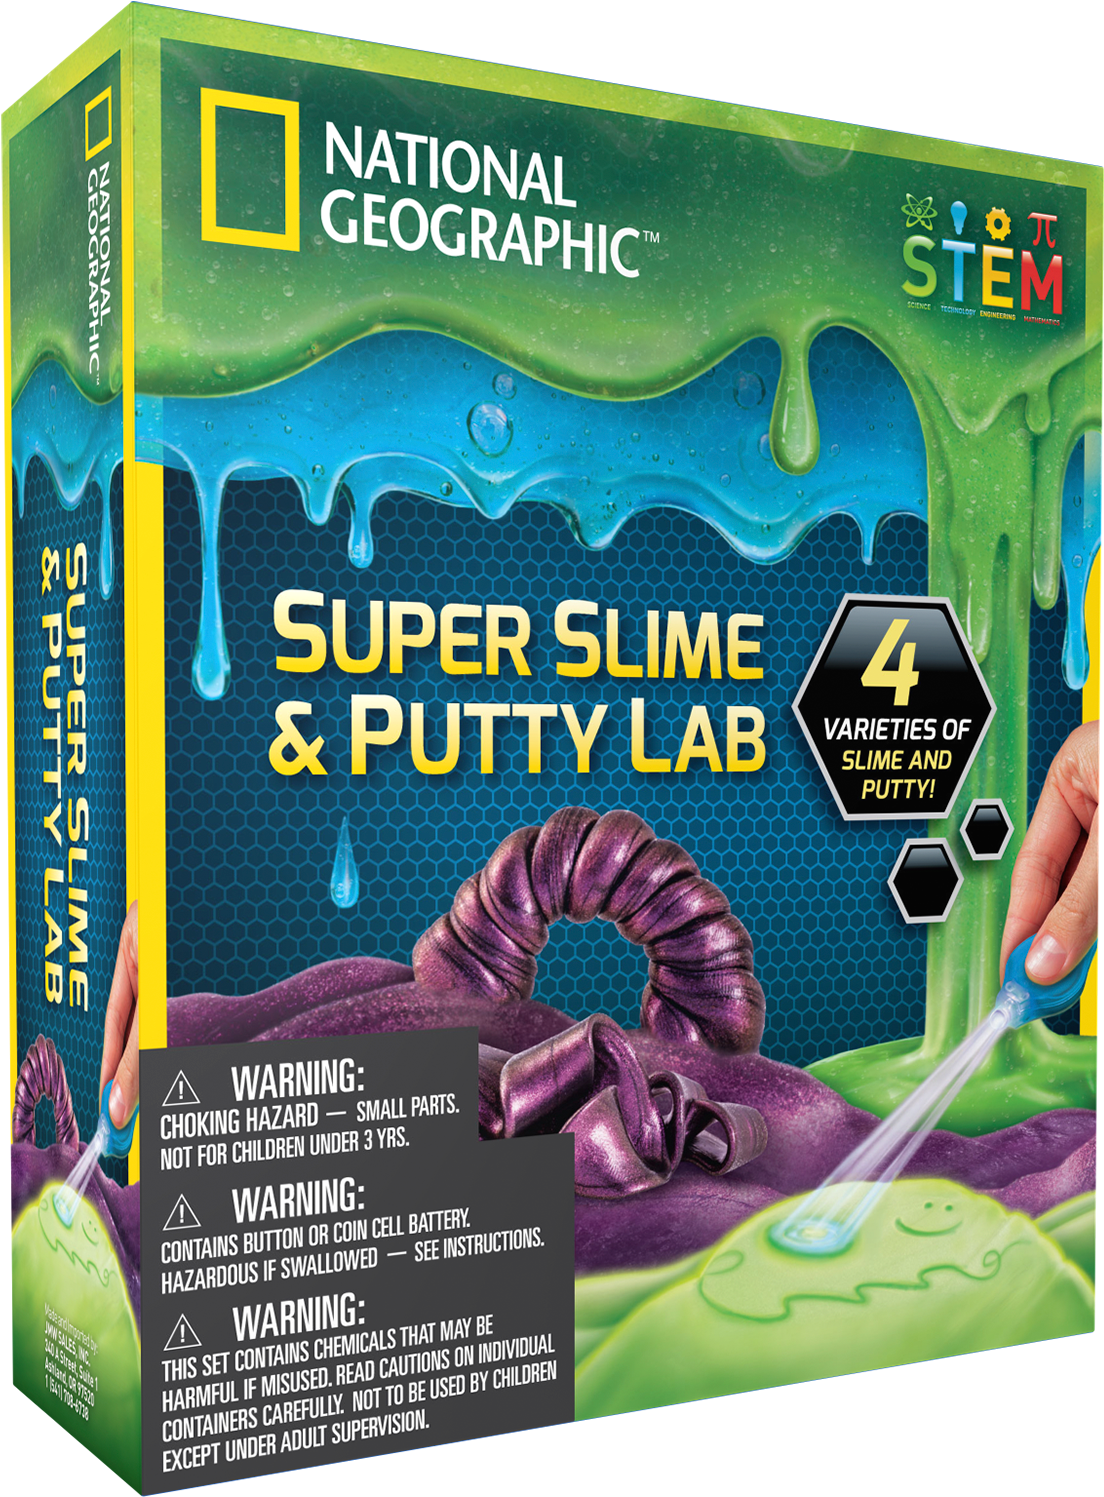 National Geographic Super Slime Putty Lab Box